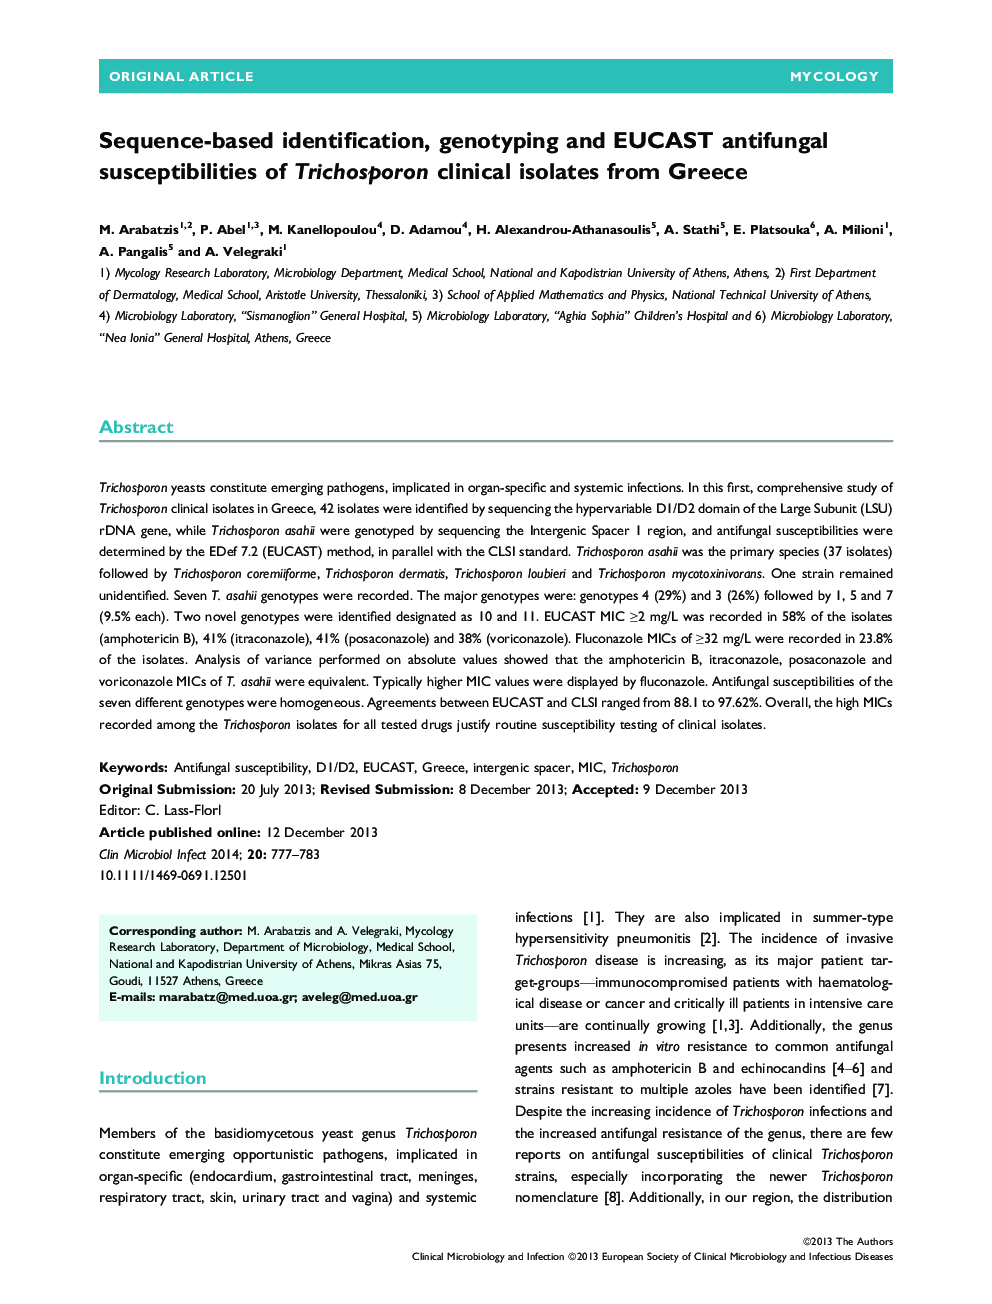 Sequence-based identification, genotyping and EUCAST antifungal susceptibilities of Trichosporon clinical isolates from Greece 